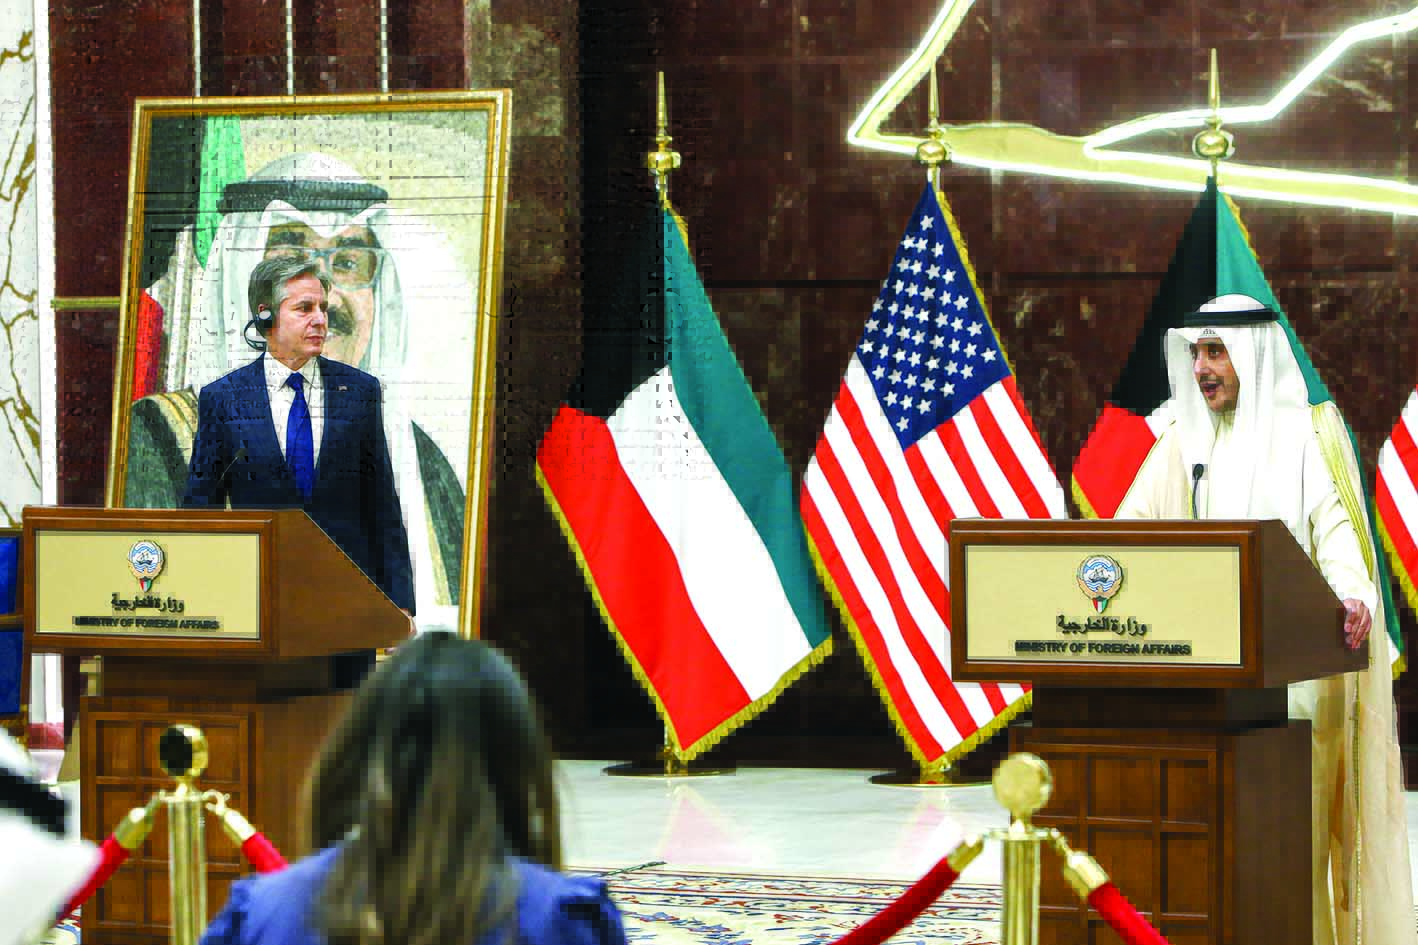 KUWAIT: Kuwaiti Foreign Minister Sheikh Ahmad Nasser Al-Mohammad Al-Sabah speaks during a joint press conference with US Secretary of State Antony Blinken at Kuwait's foreign ministry headquarters in Kuwait City yesterday. - Photo by Yasser Al-Zayyatn